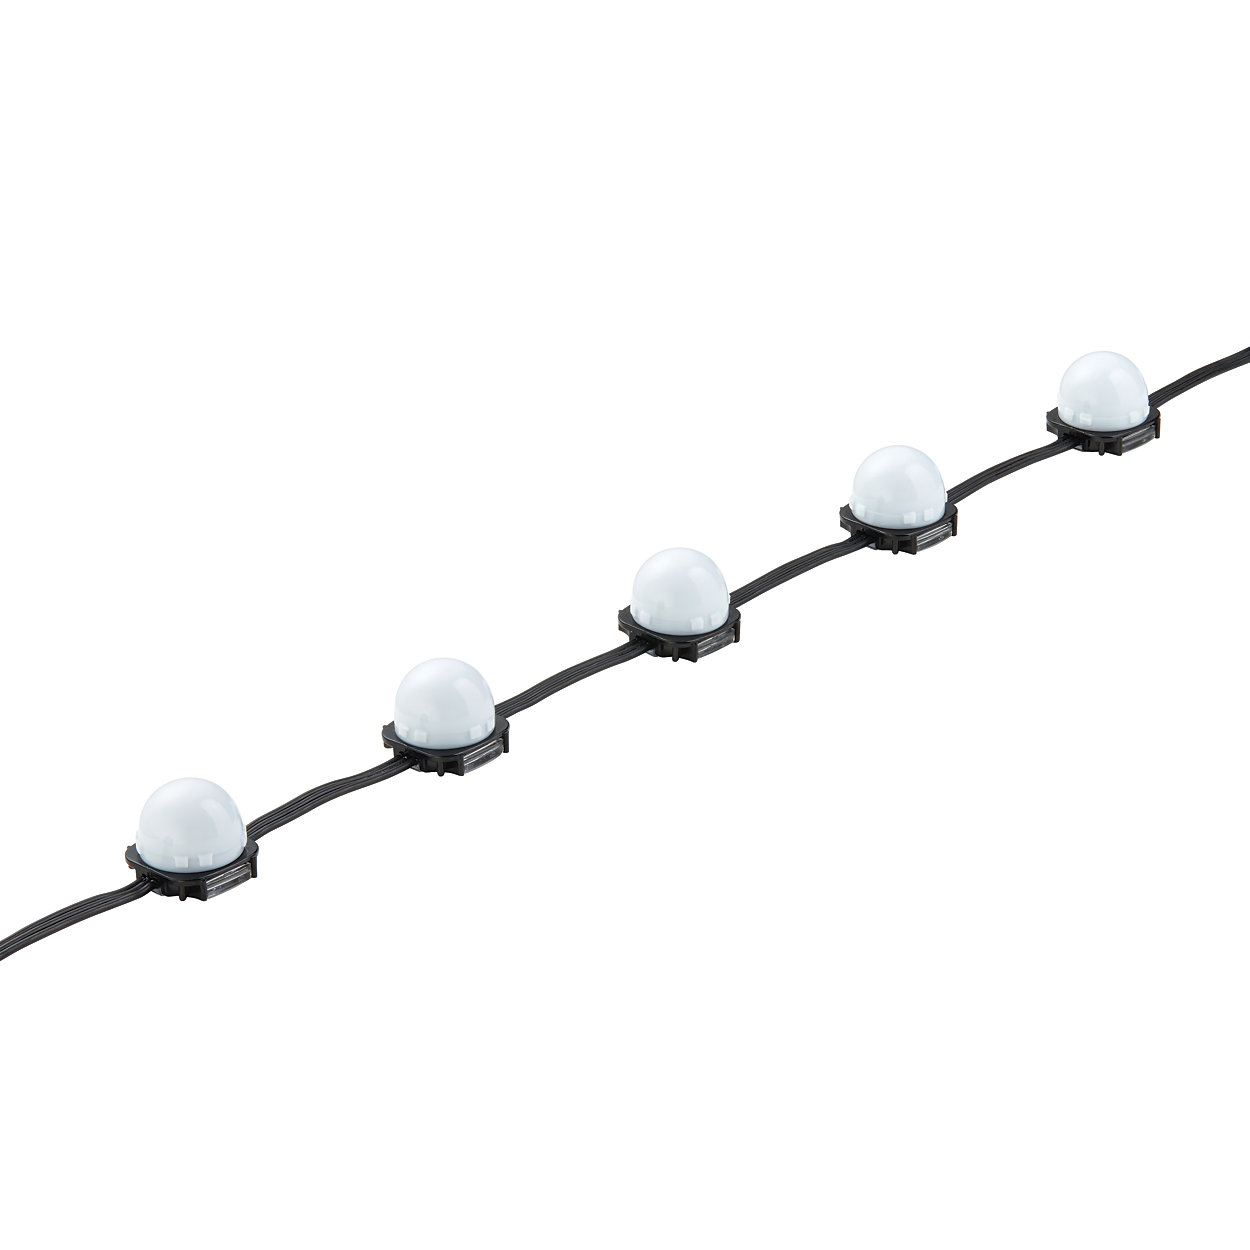 iW Flex Compact - Flexible strands of high-intensity LED nodes with tunable white light